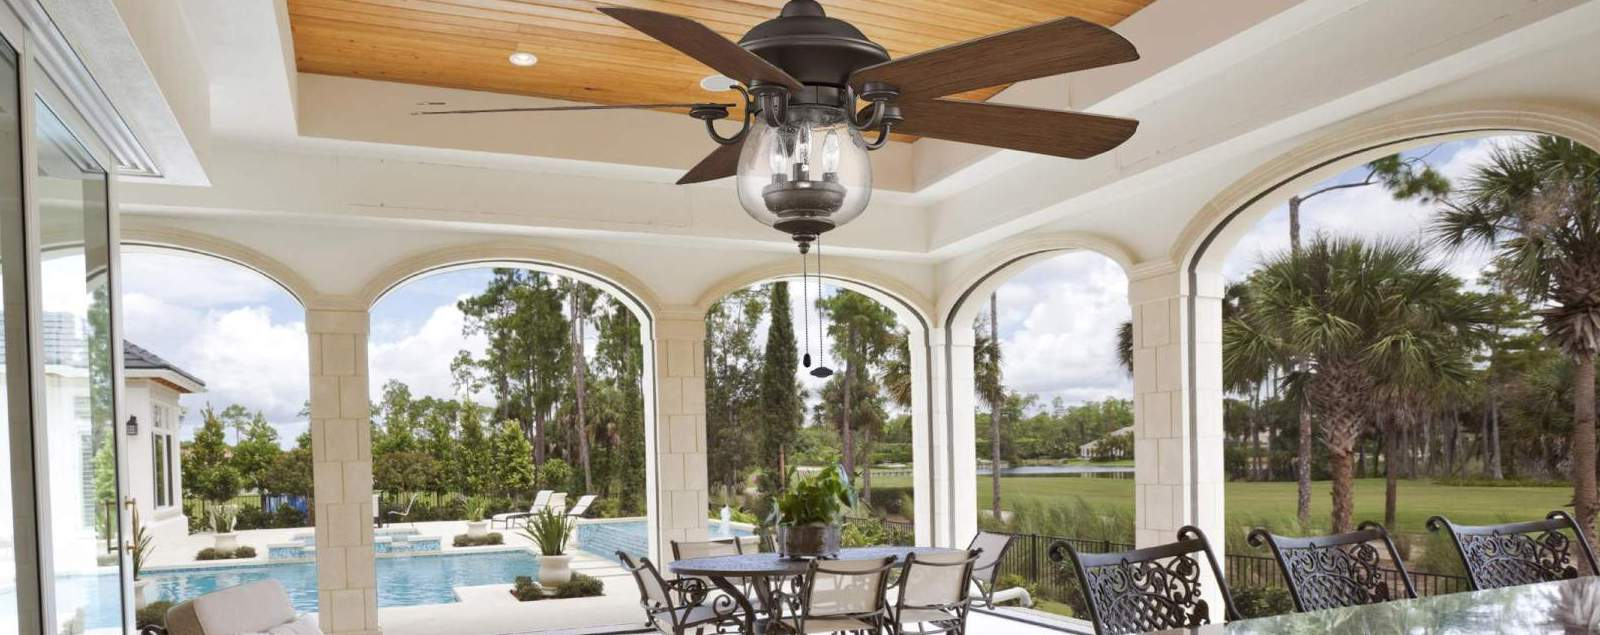 Top Quality Outdoor Ceiling Fans For Harsh Environments for measurements 1600 X 635